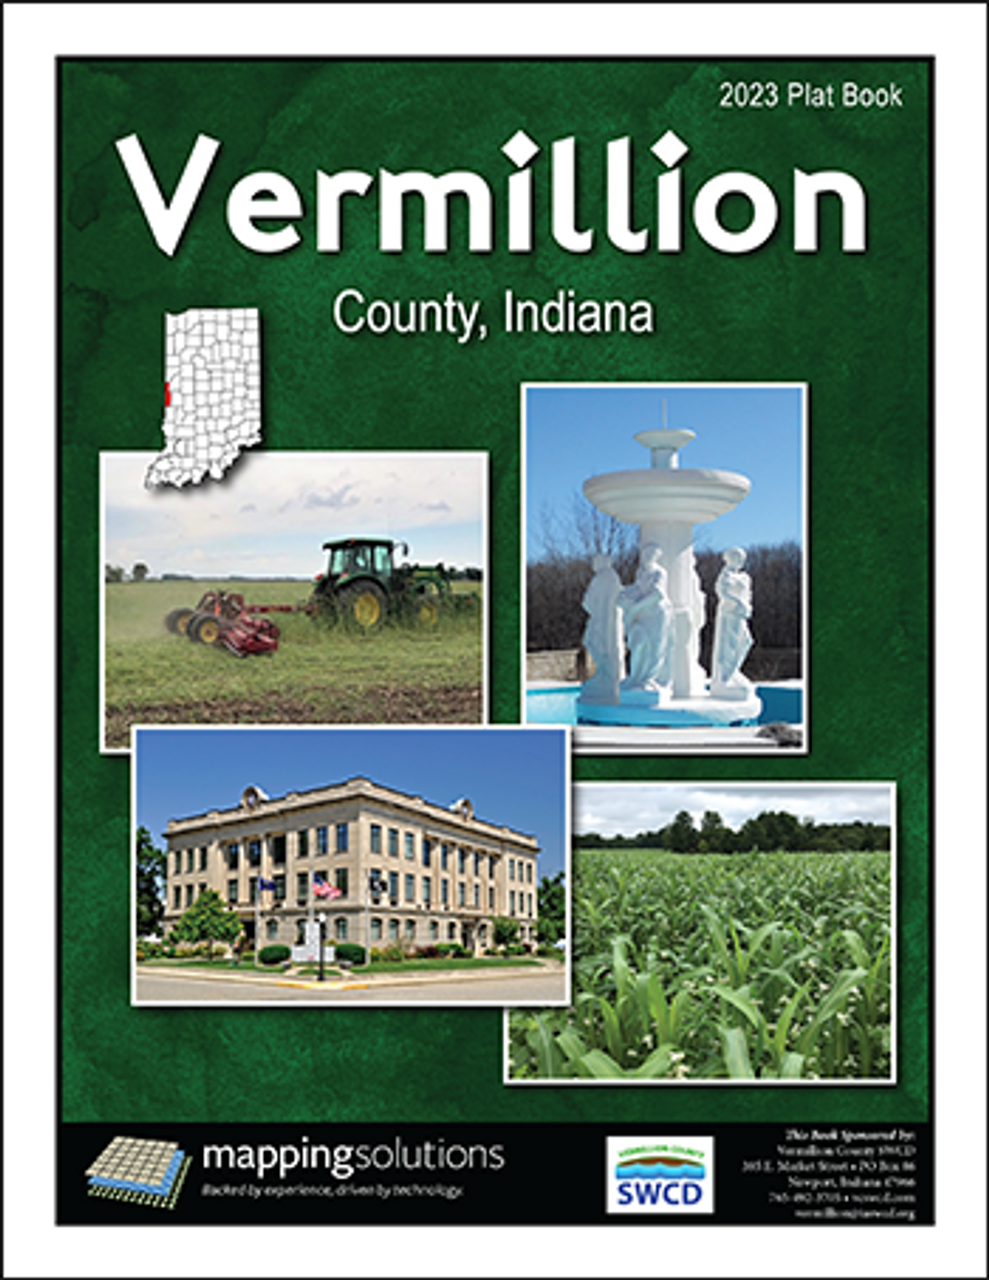 Vermillion County Indiana 2023 Plat Book Mapping Solutions 7797